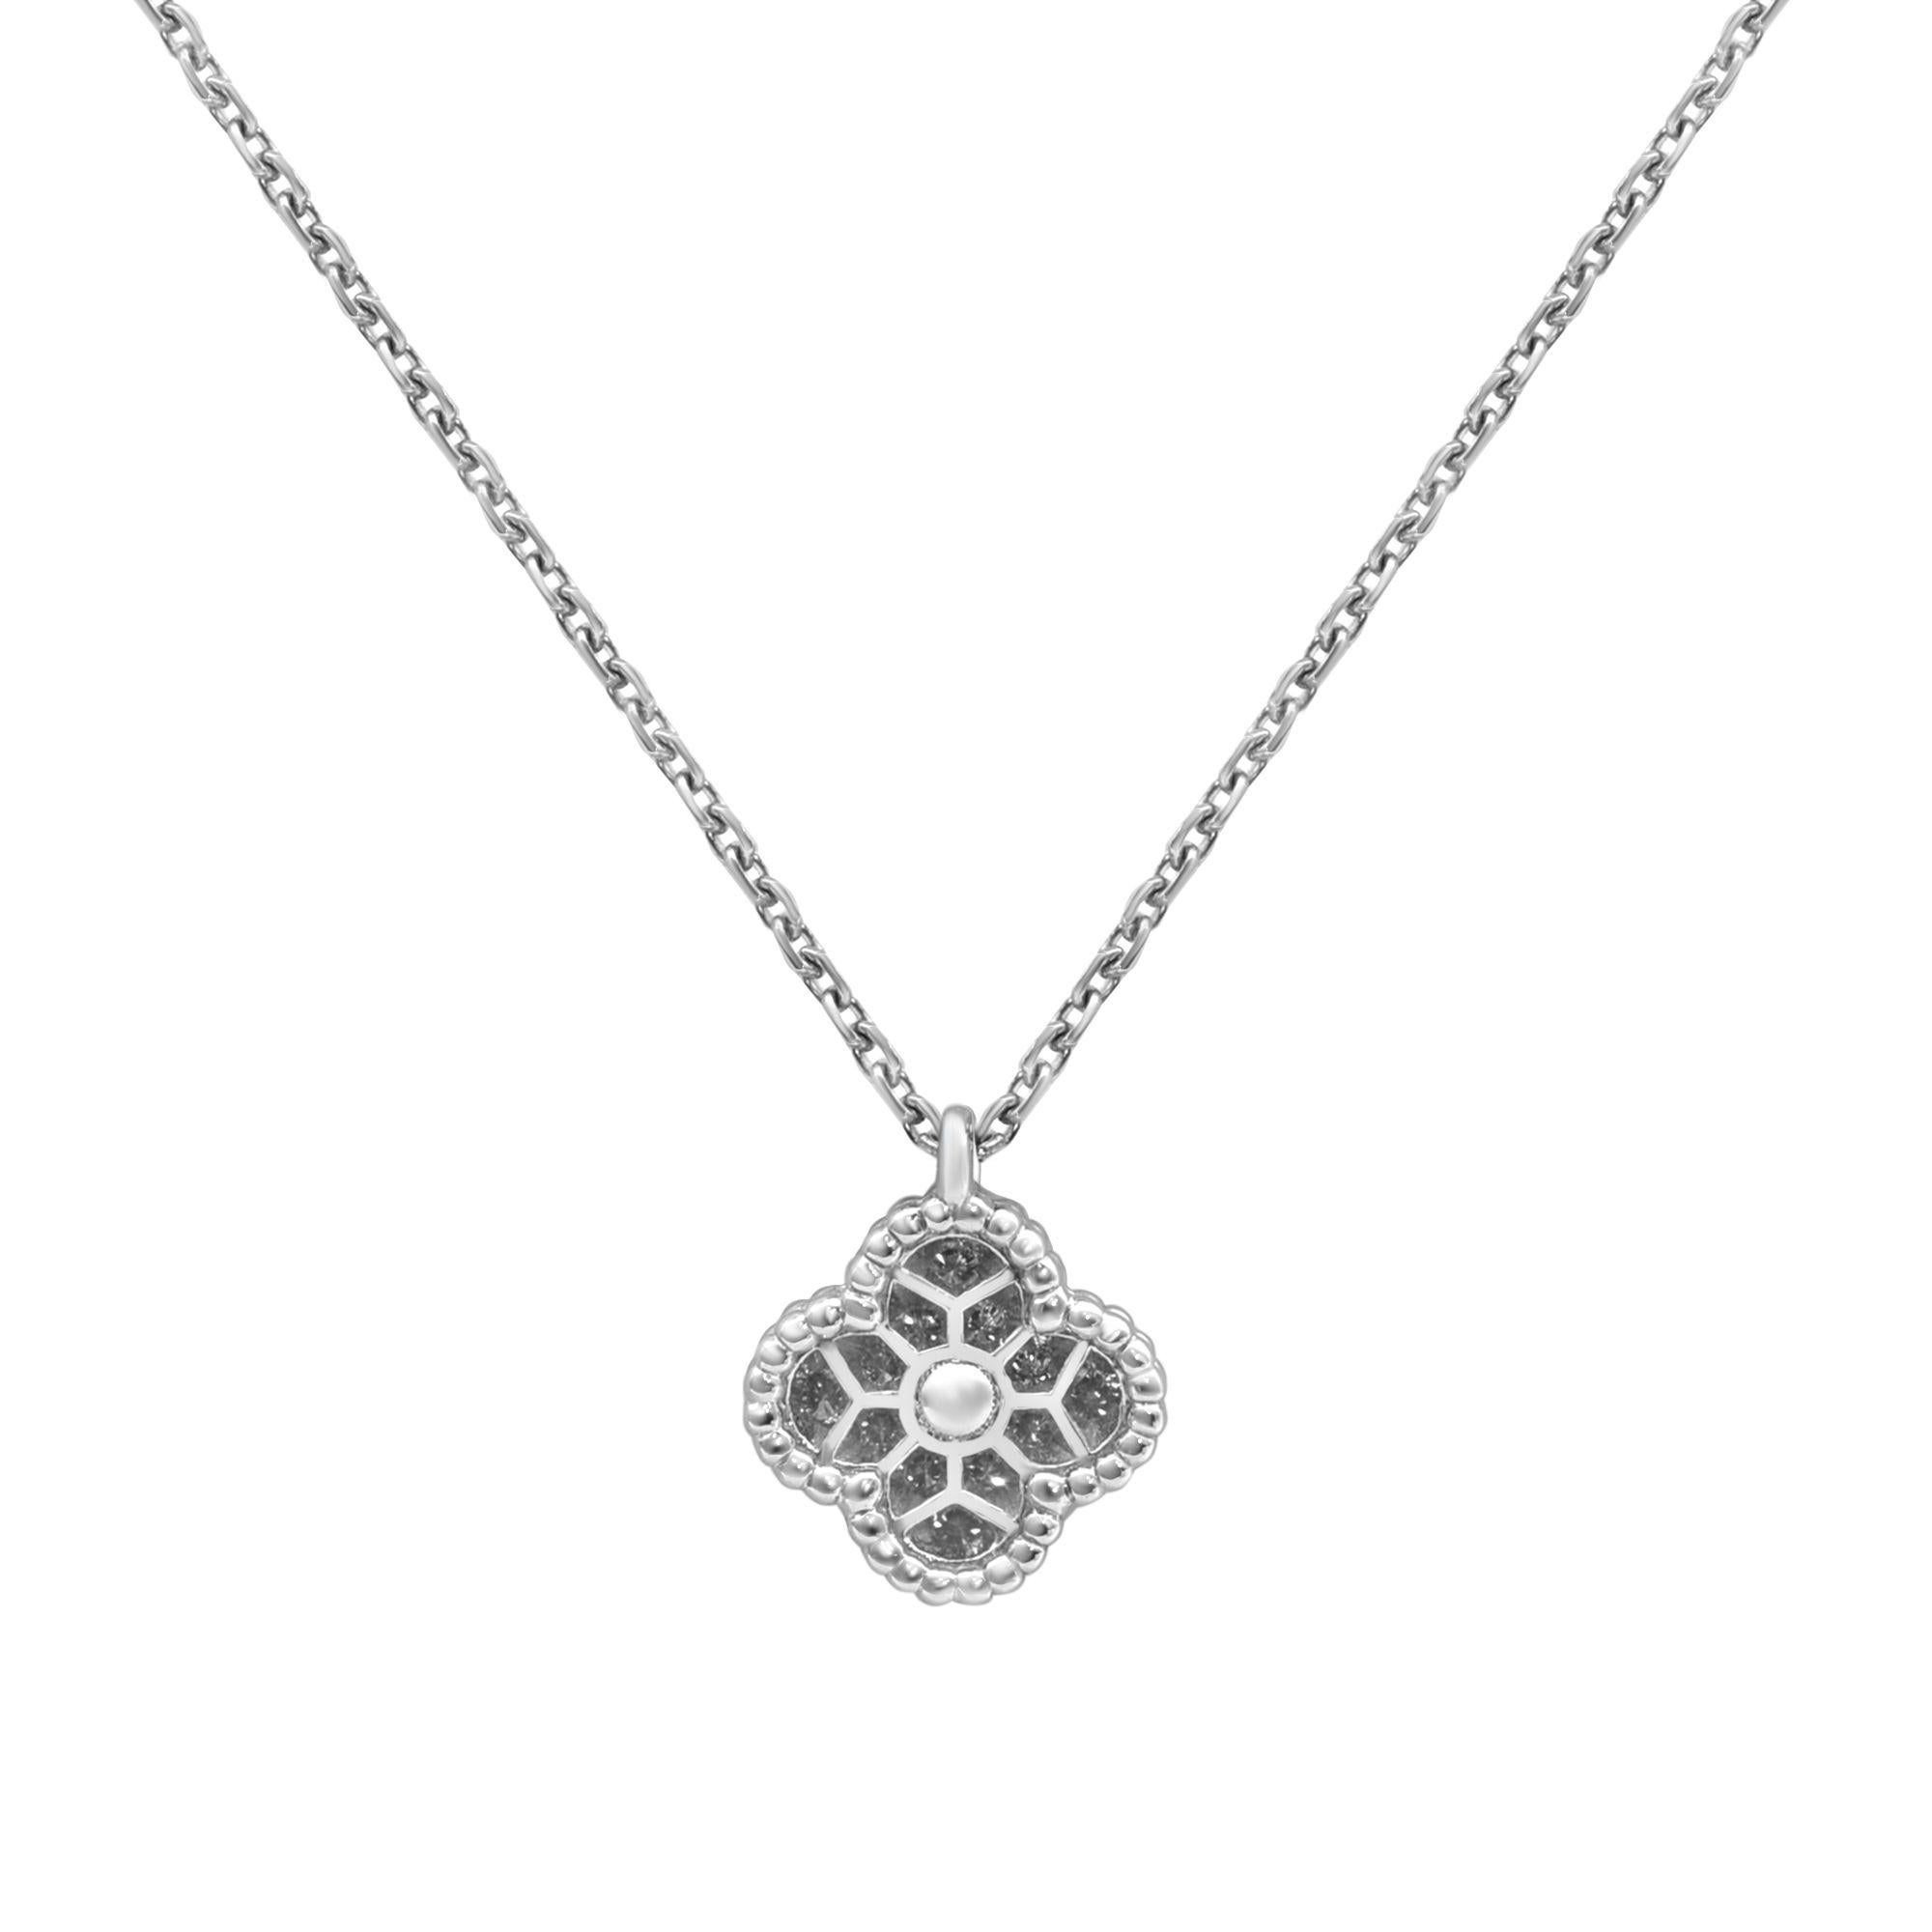 Van Cleef & Arples Sweet Alhambra mini pendant in 18k white gold. Set with 12 tiny round diamonds. Total carat weight 0.08. Diamond color DEF and clarity IF -VVS. Necklace length: 16 inches. Excellent pre-owned condition. Original box and papers are